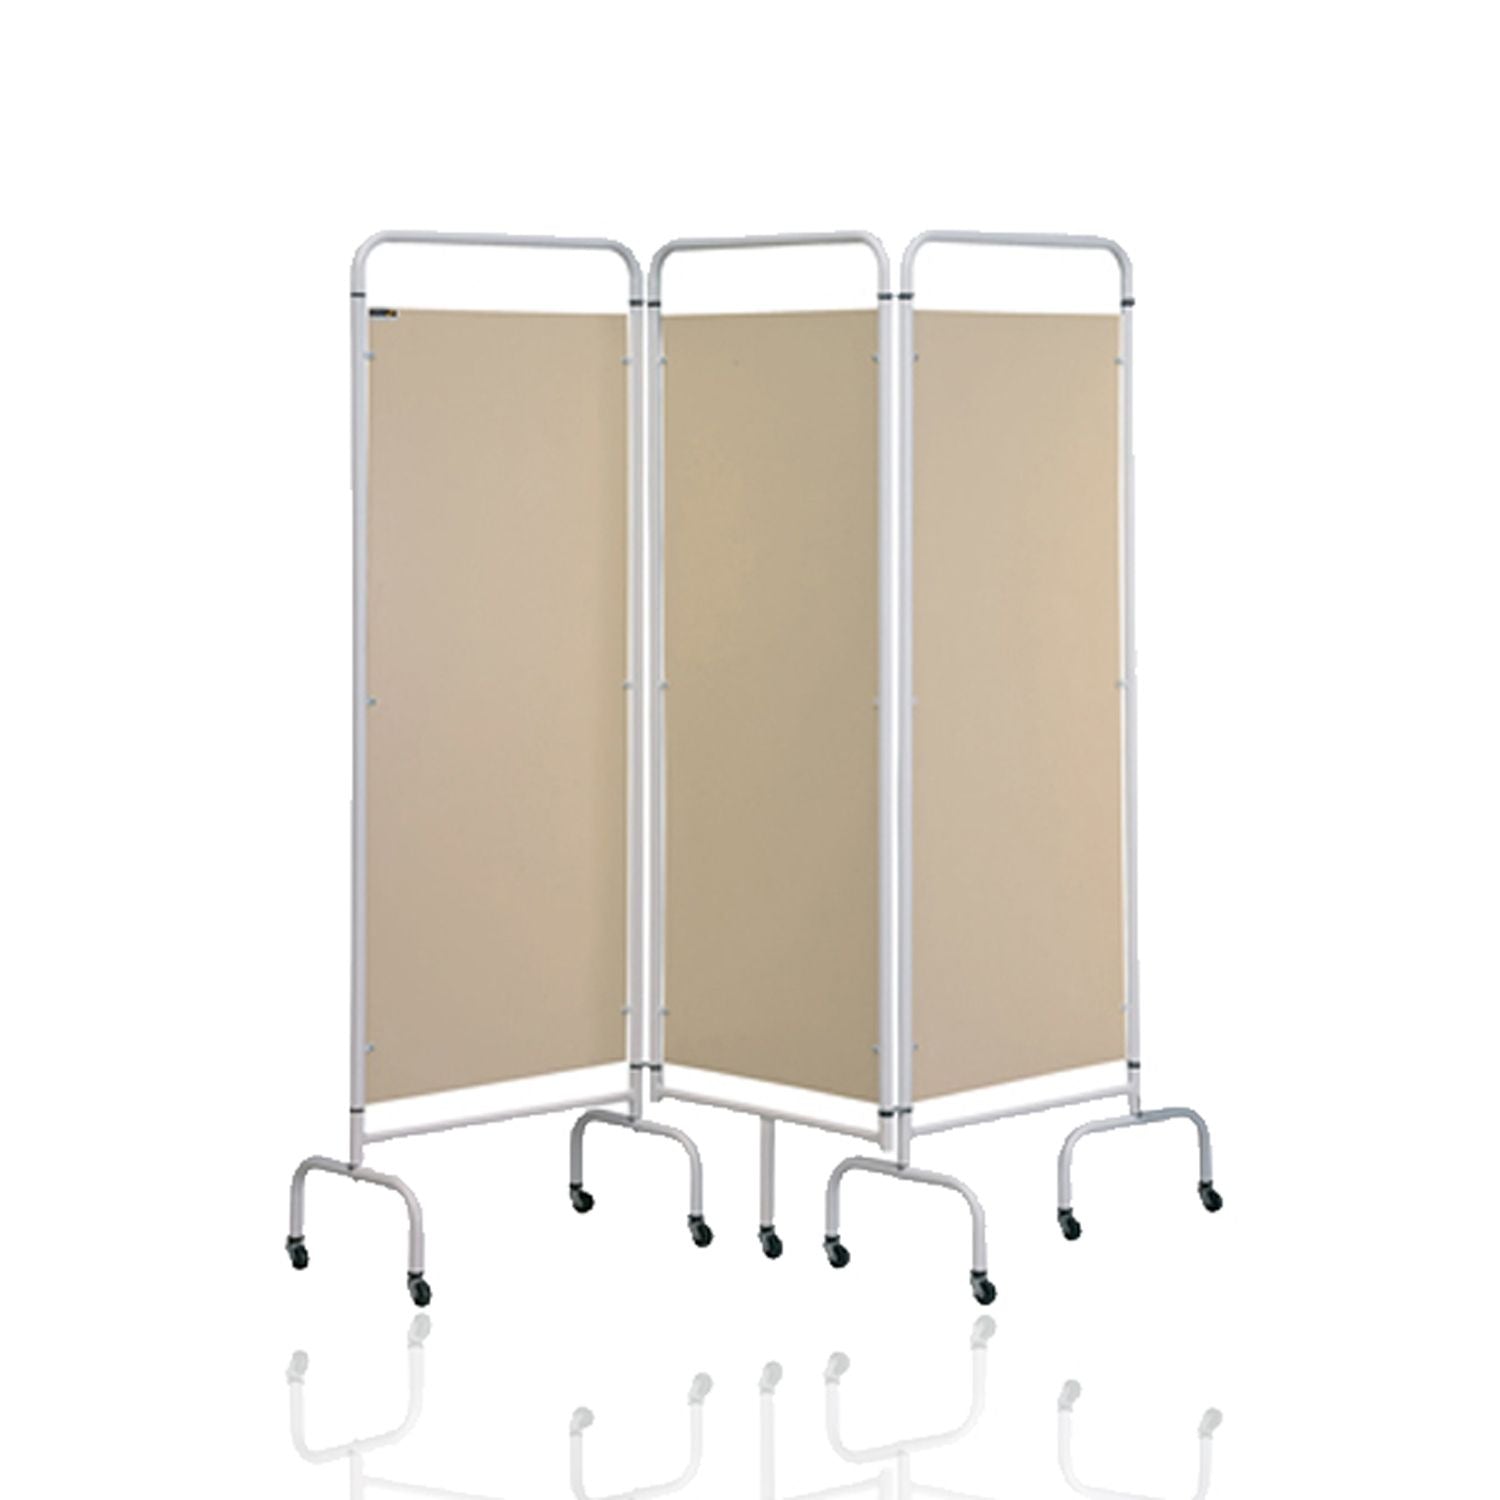 Sunflower 3 Section Mobile Folding Screen with Hygienic Disposable Curtains (6)